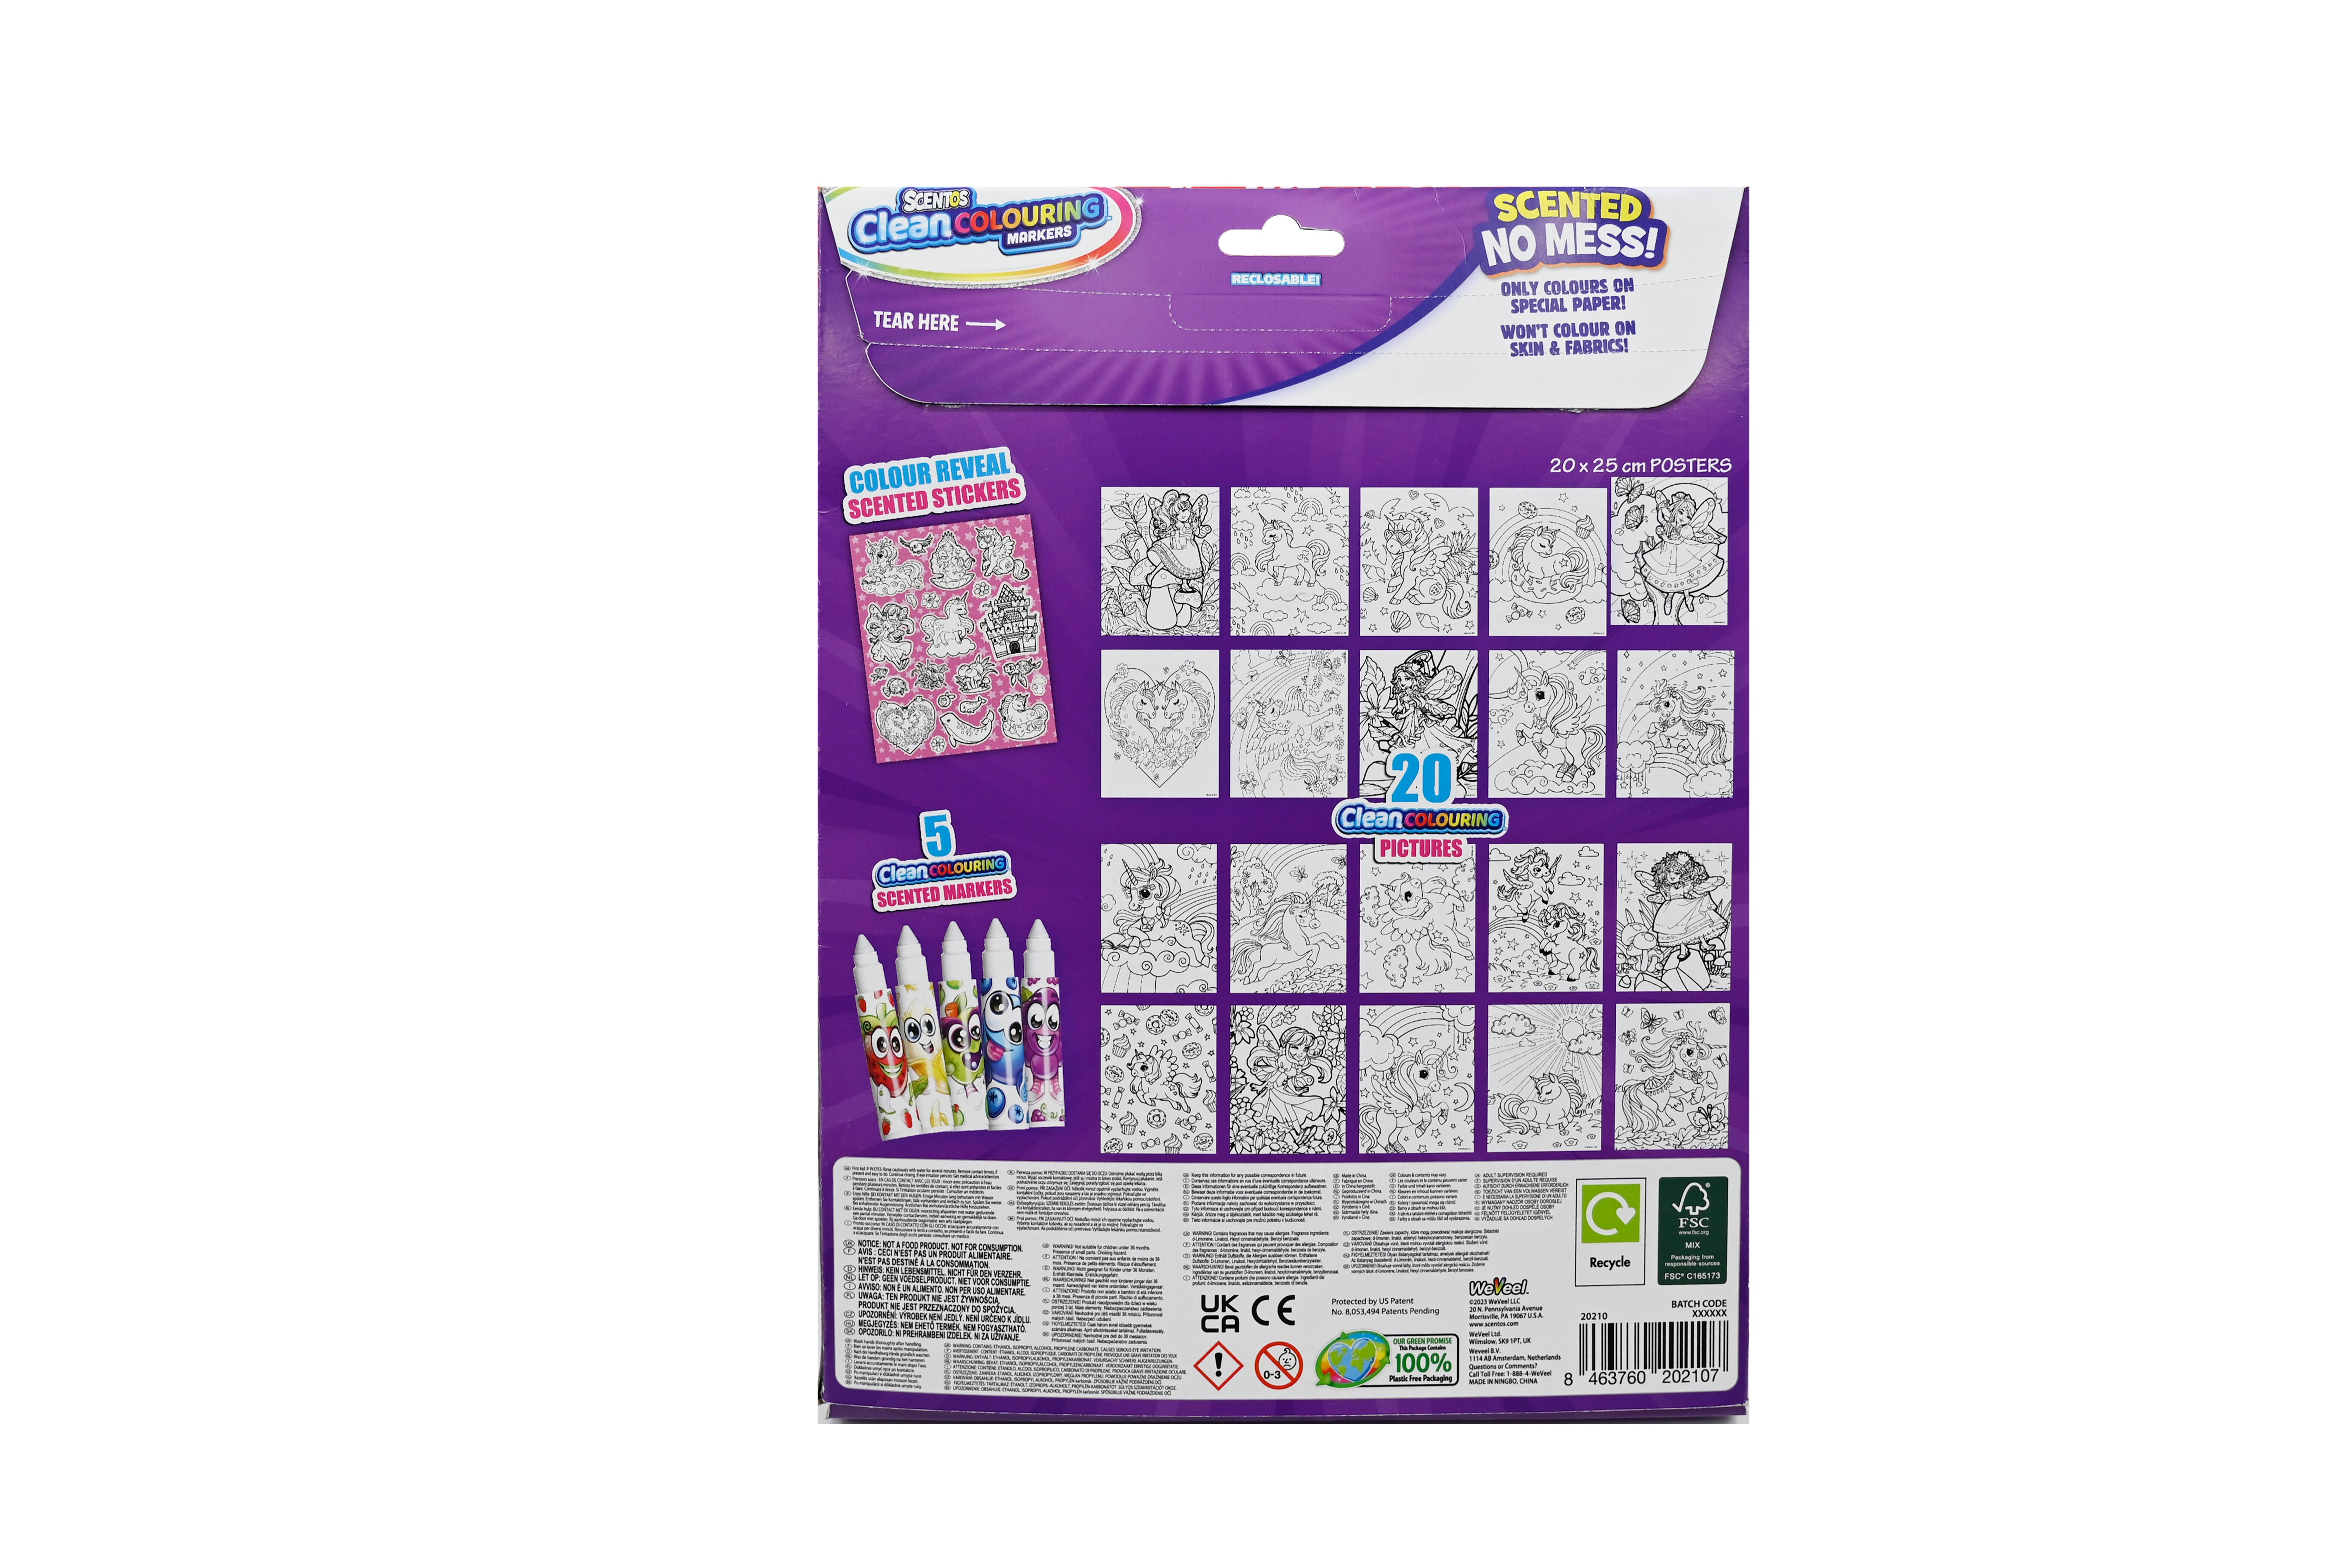 Scentos Clean Colouring Markers - Enchanted